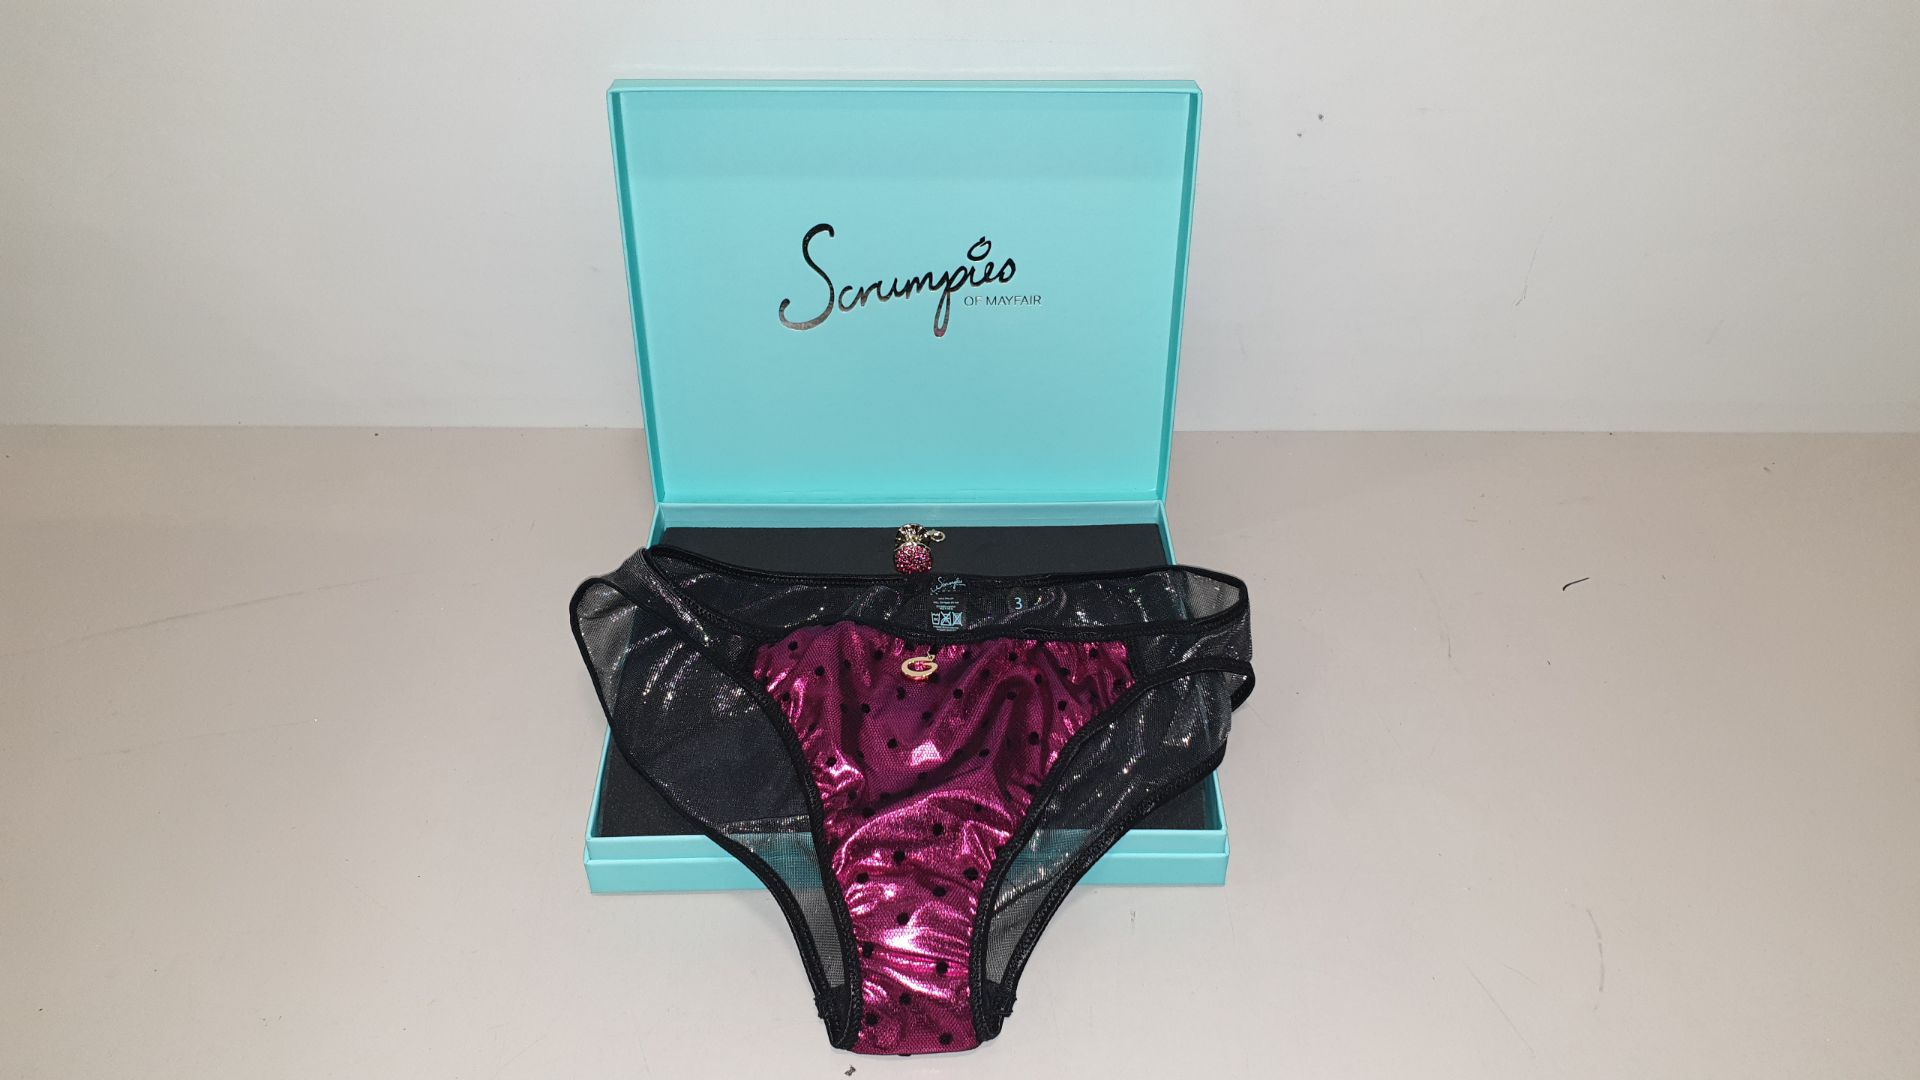 50 X SCRUMPIES OF MAYFAIR PINK LADY TANGA BRIEFS - SIZES 10-16 (2-5) - QTY BREAKDOWN AS 2(10), 3(